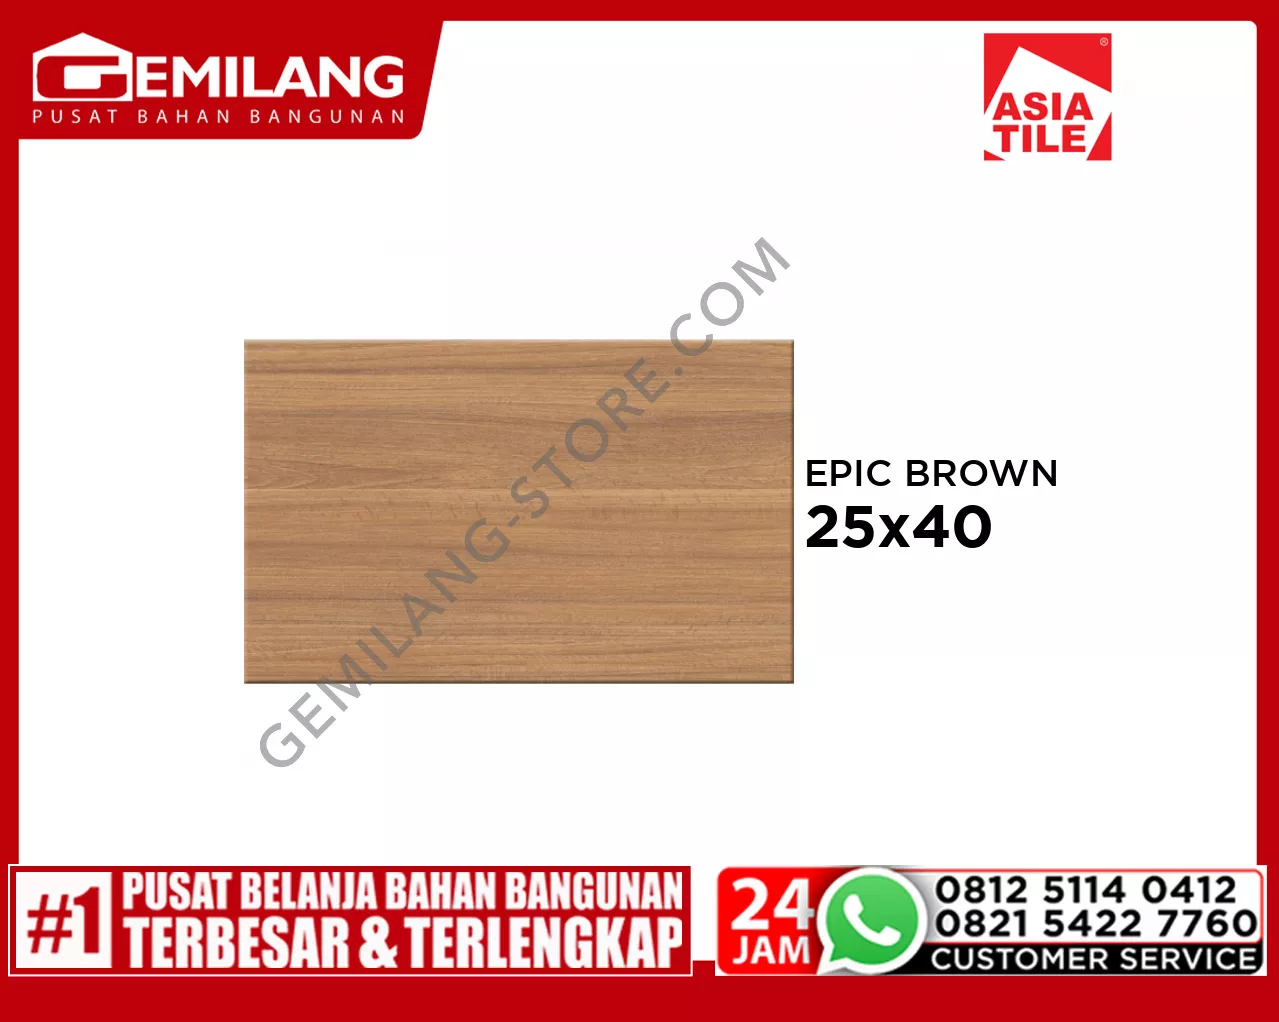 ASIA EPIC BROWN 25 x 40